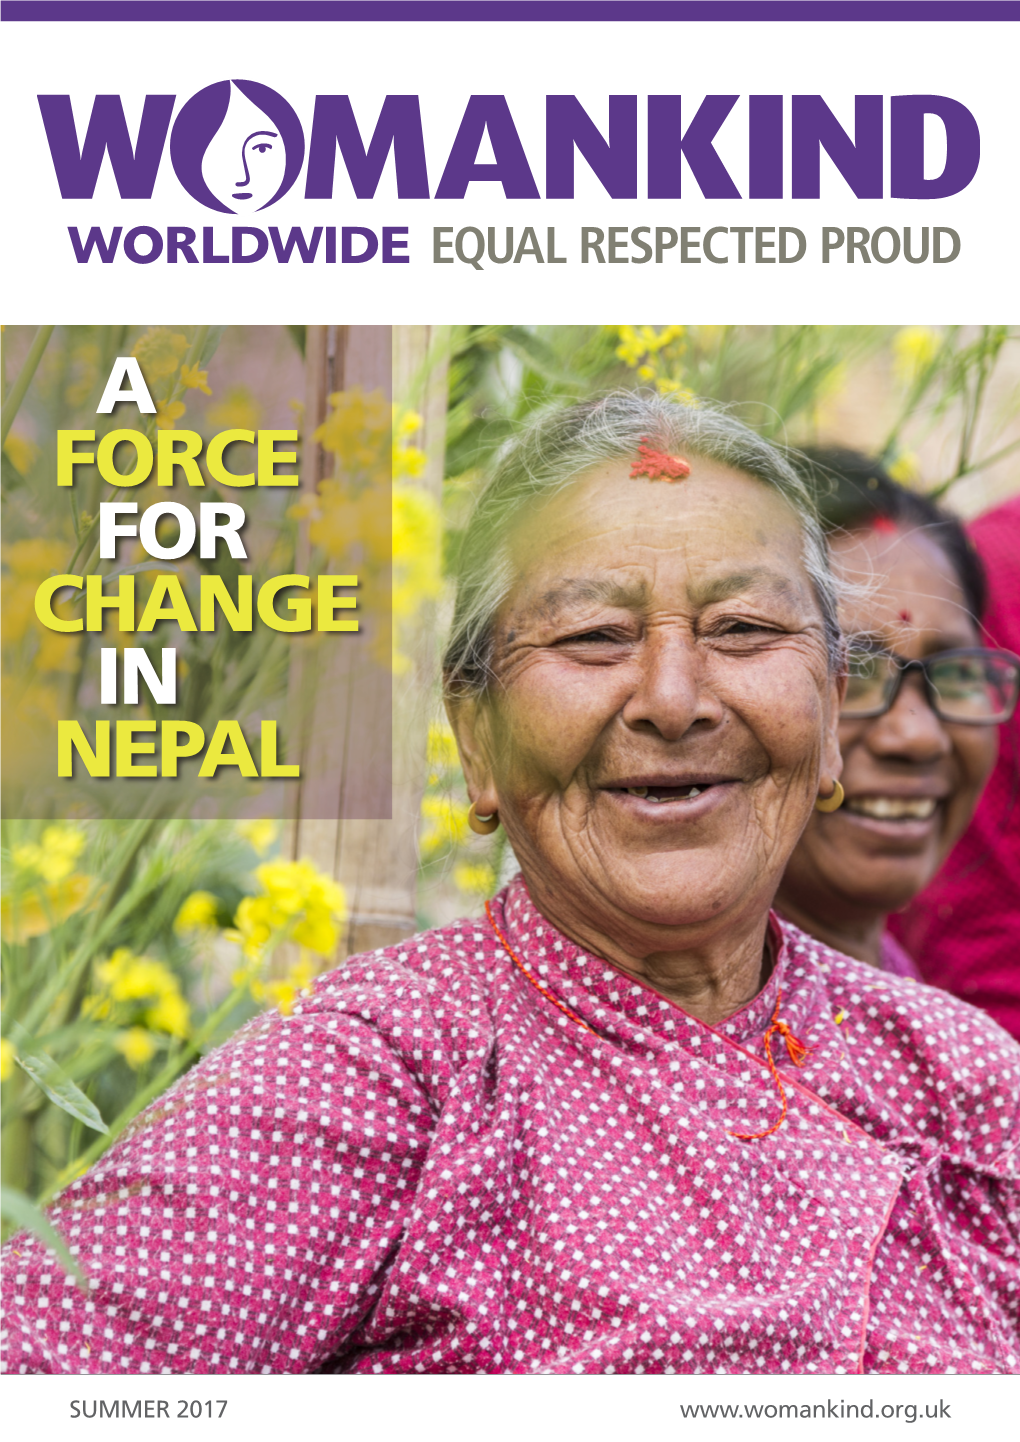 A Force for Change in Nepal